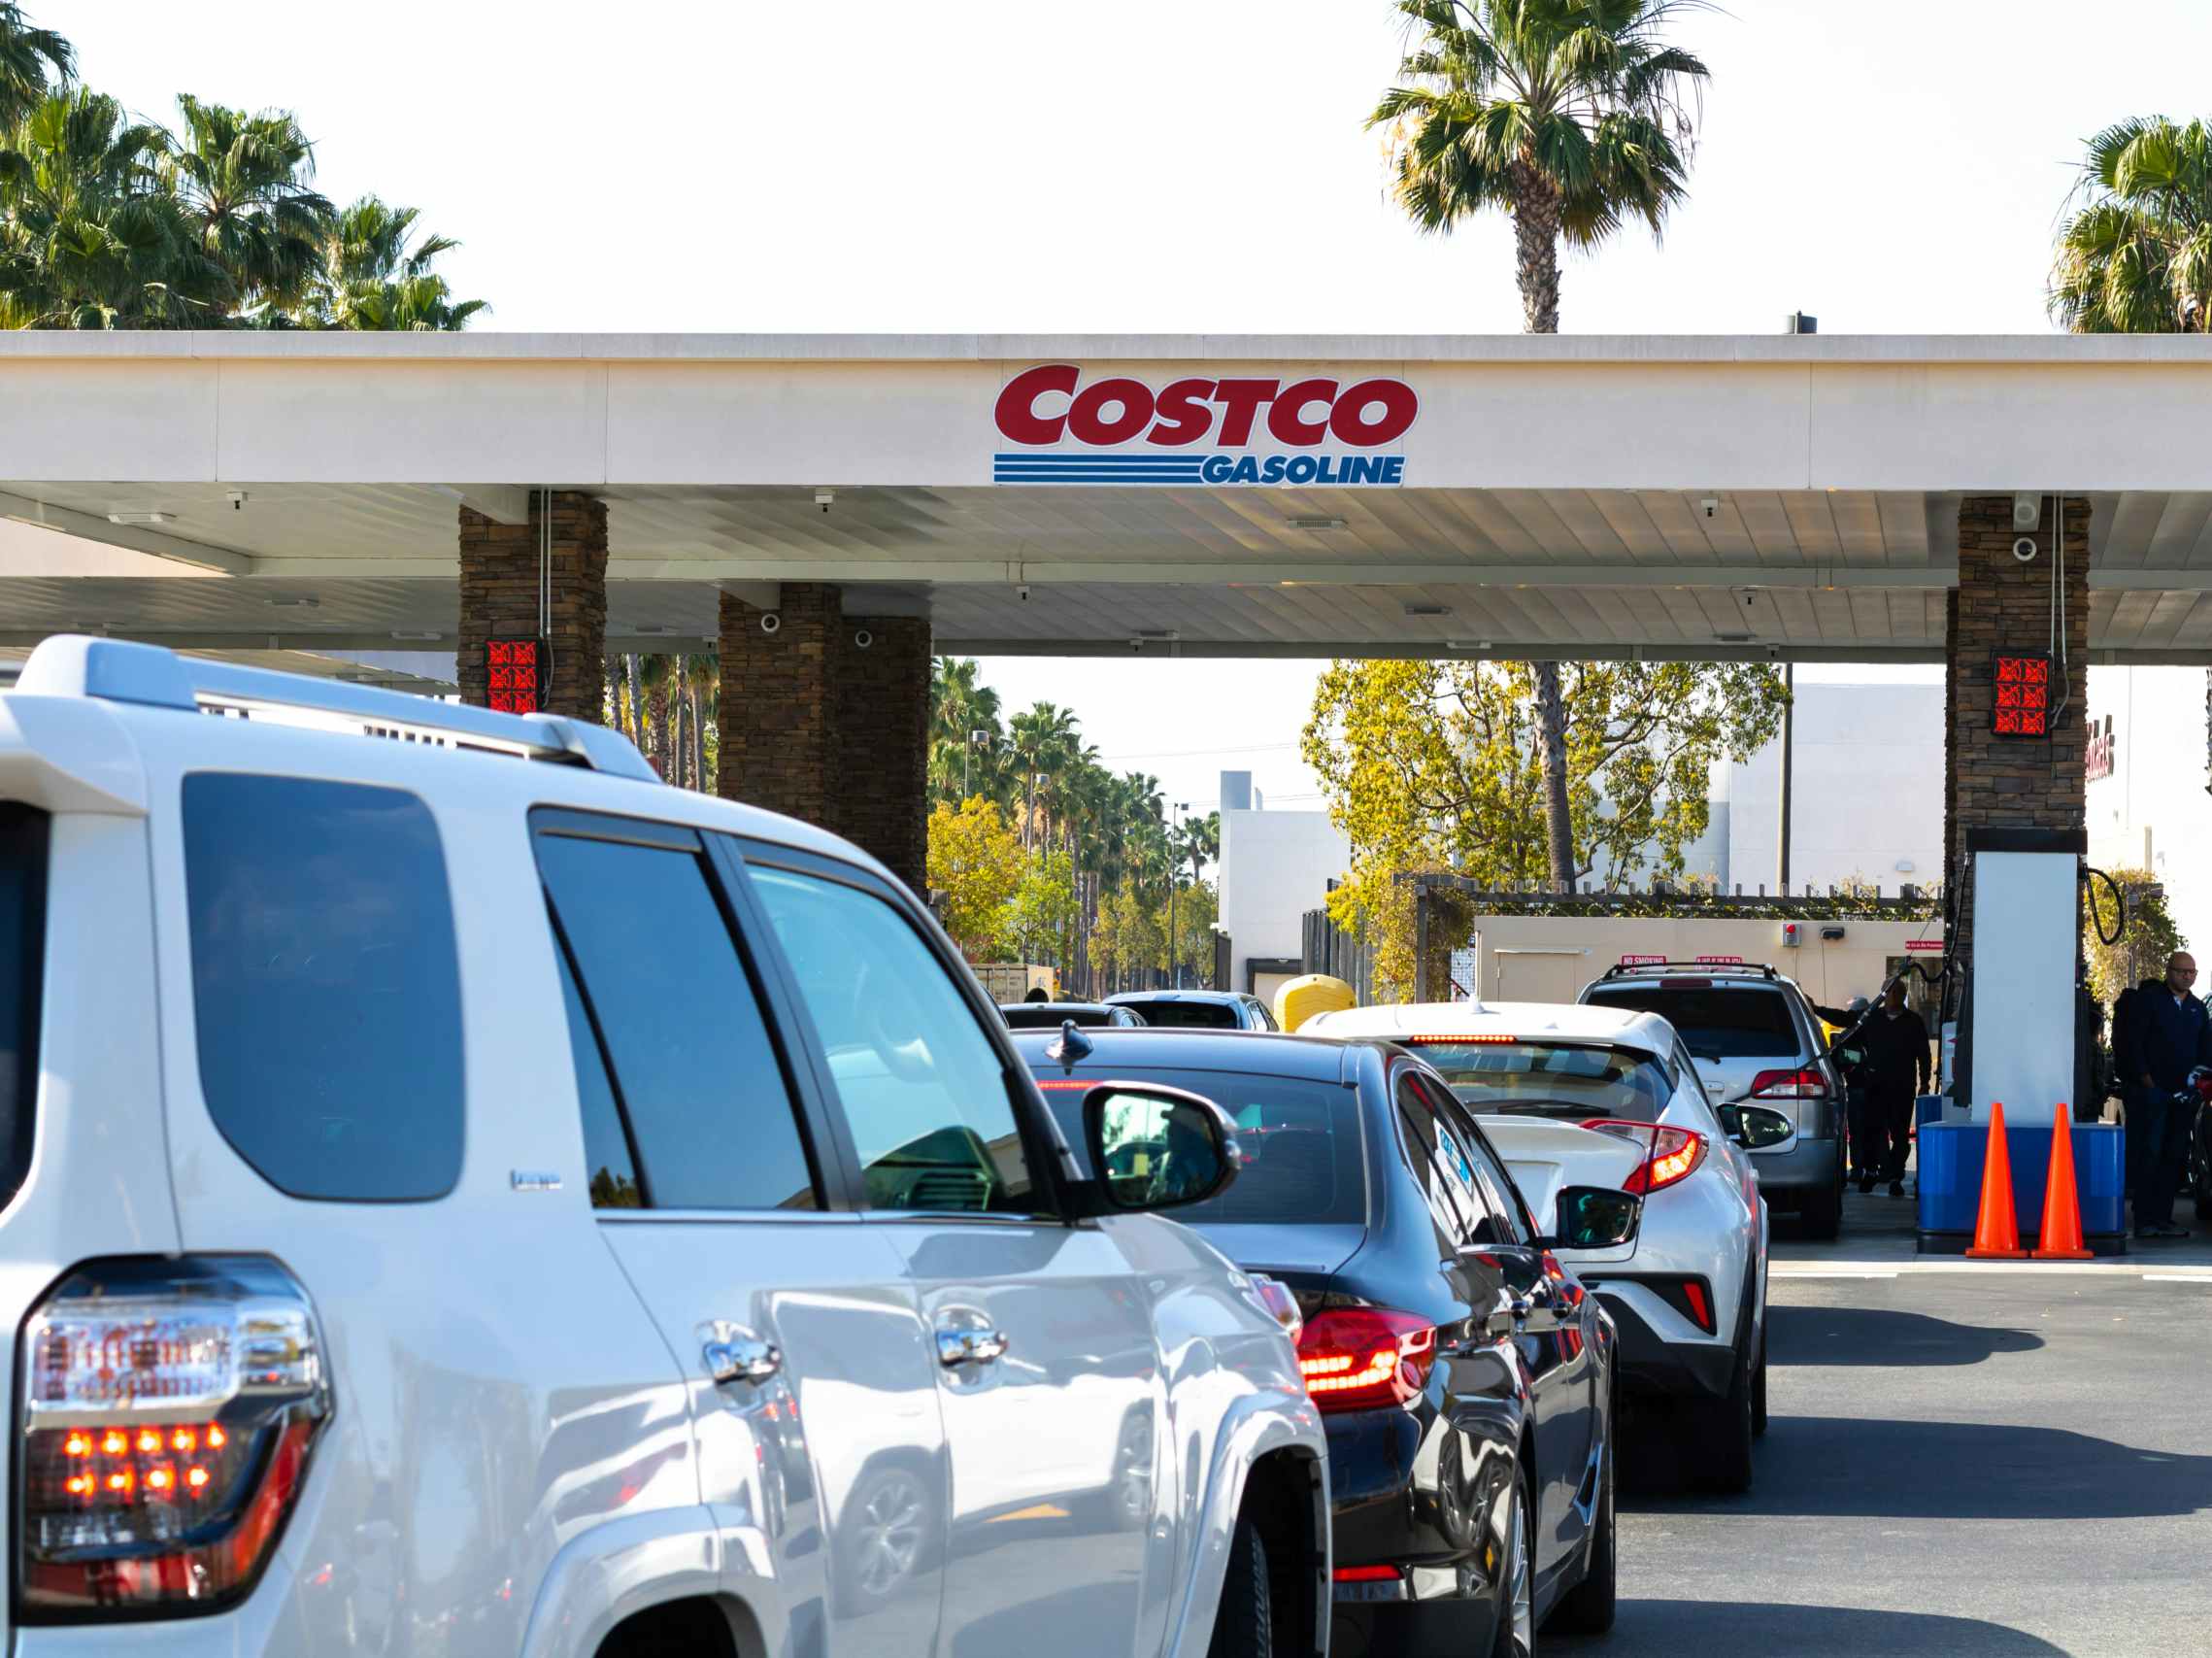 A line of cars leading to the Costco gas station pumps.